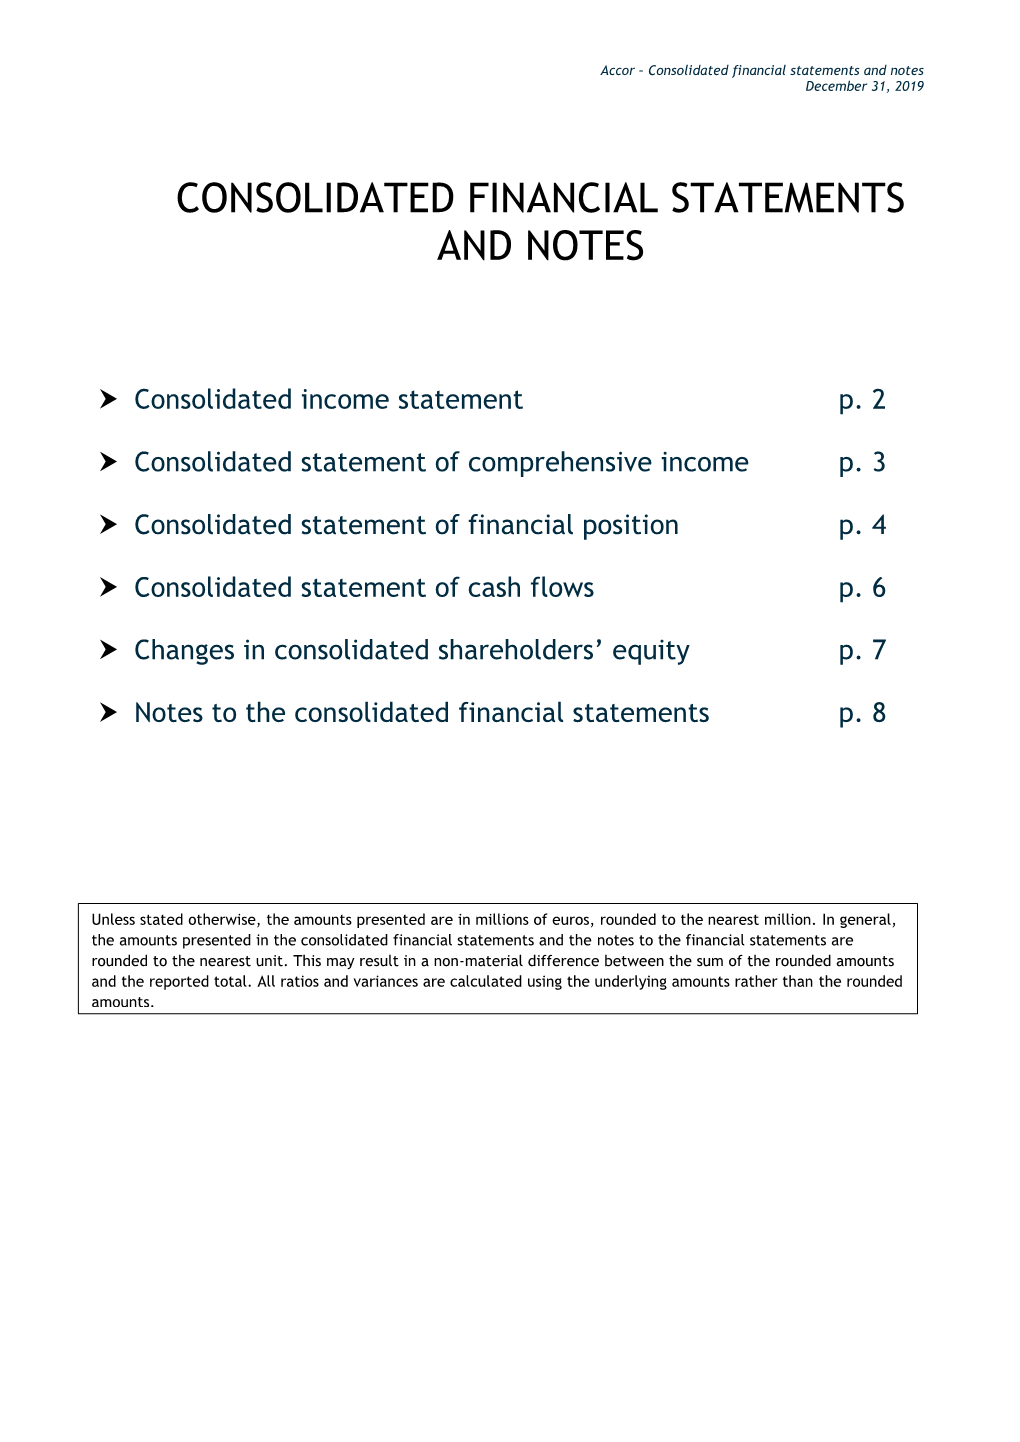 Consolidated Financial Statements and Notes December 31, 2019